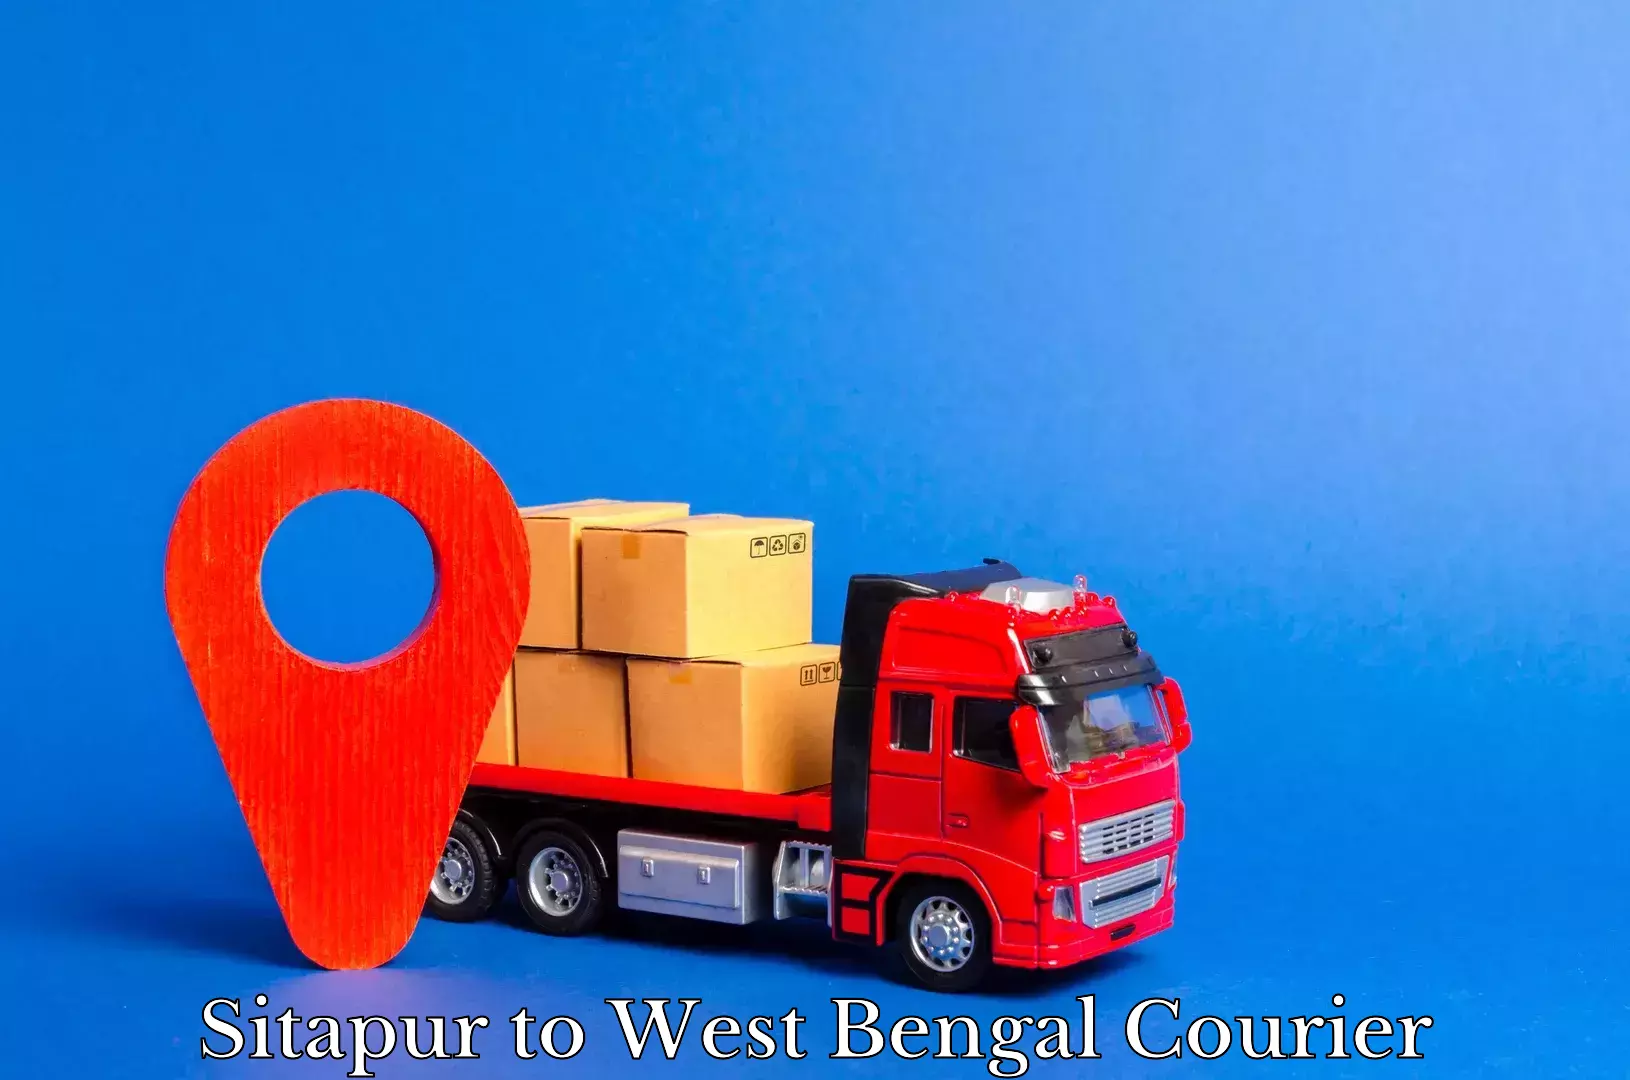 Doorstep delivery service Sitapur to West Bengal